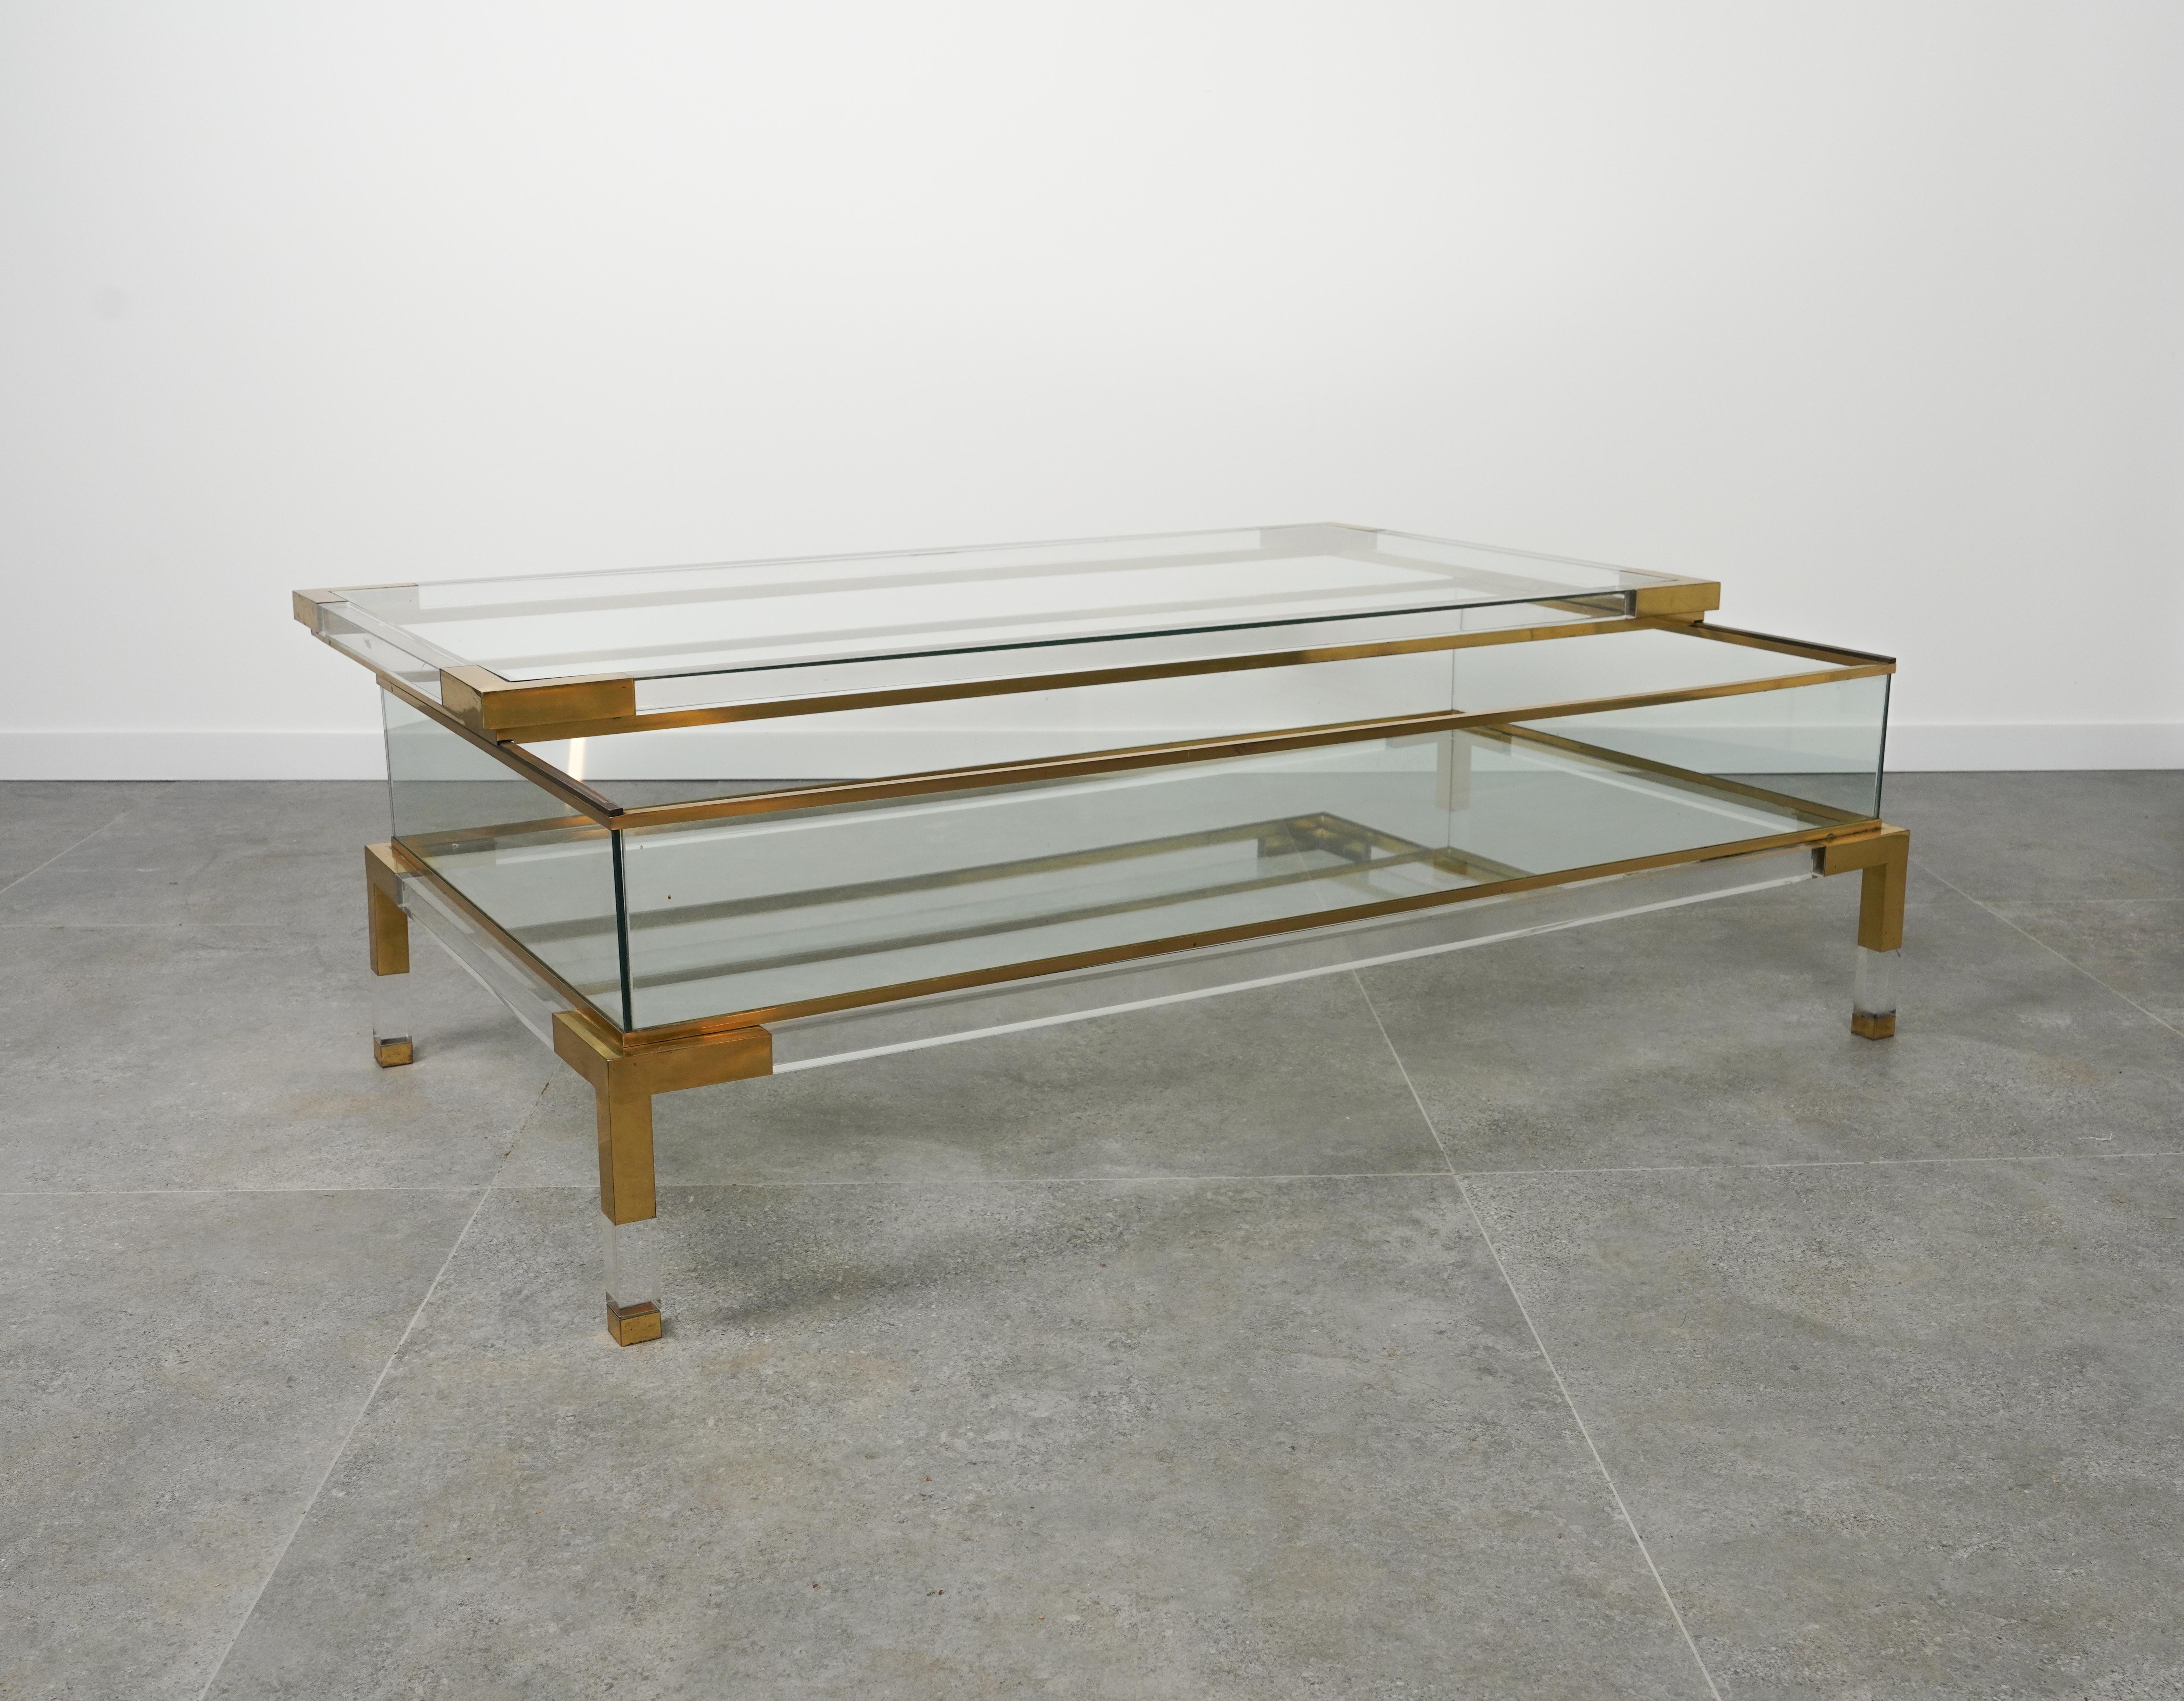 Midcentury Coffee Table in Lucite, Brass & Glass by Maison Jansen, France 1970s For Sale 13